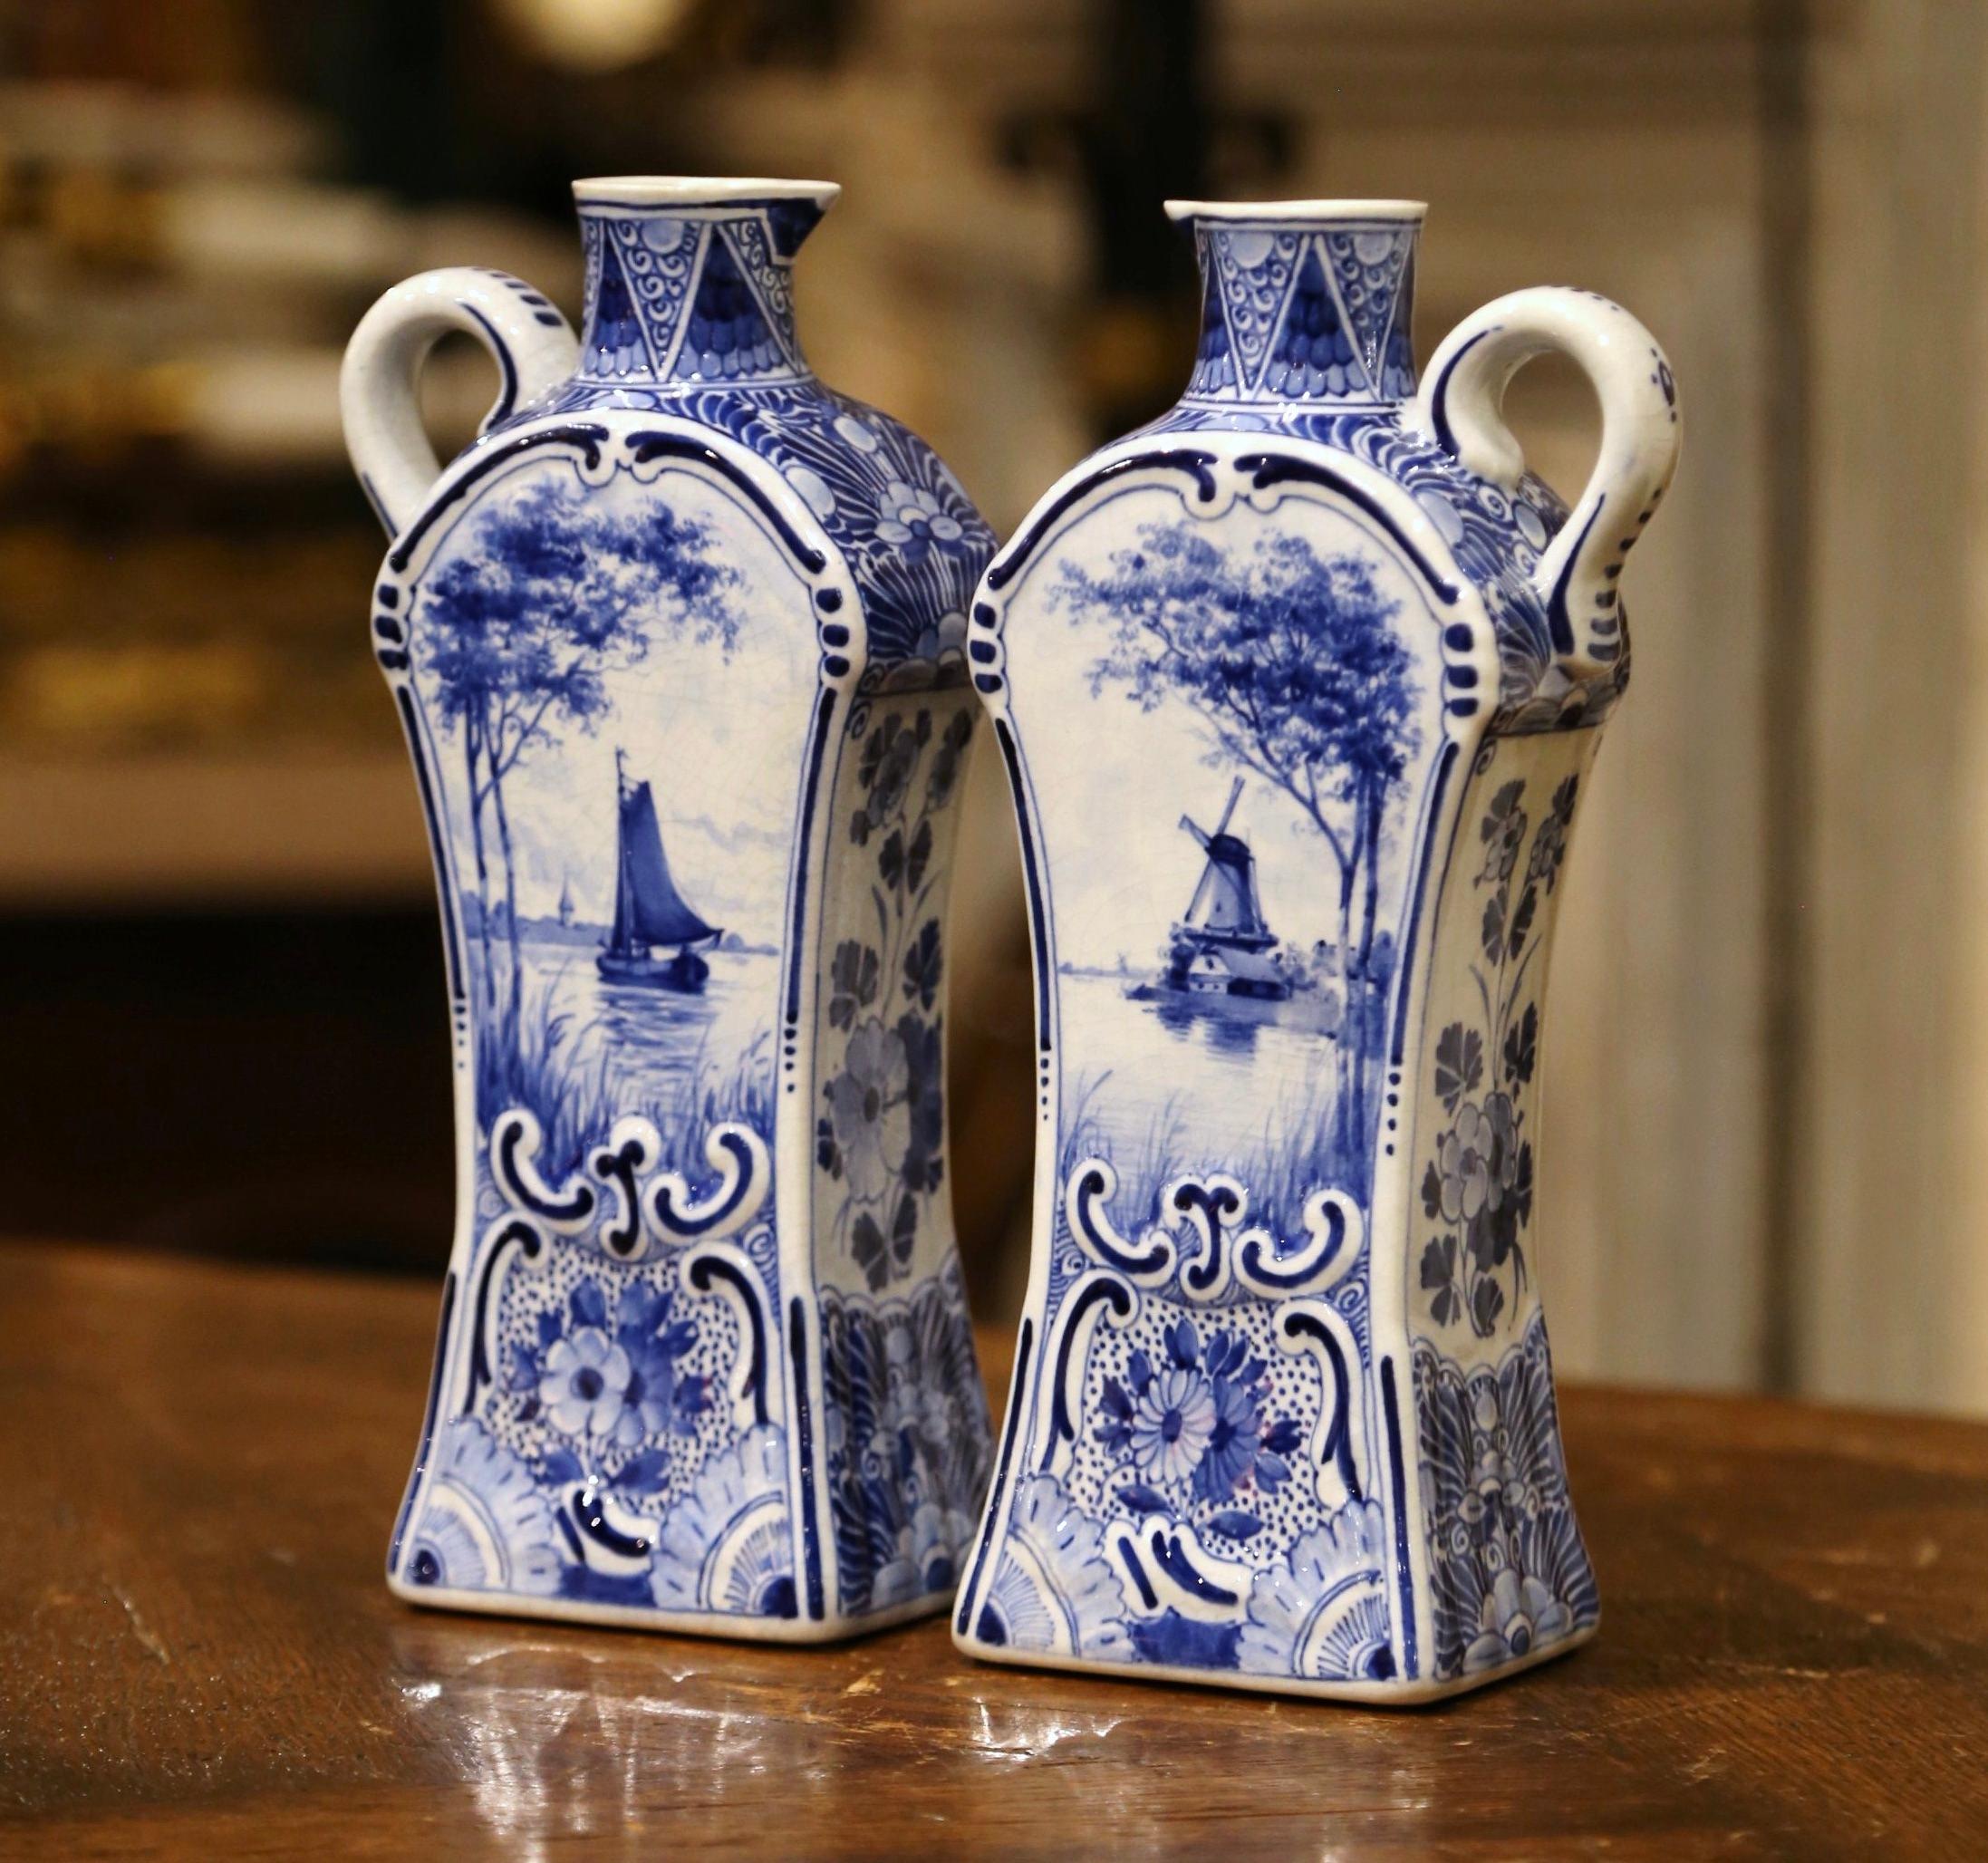 Decorate a shelf or kitchen counter with this elegant pair of antique Delft olive oil or vinegar containers. Crafted in Holland circa 1920, both tall vases feature an intricate shape and are dressed with a side handle. Each vessel is hand painted in